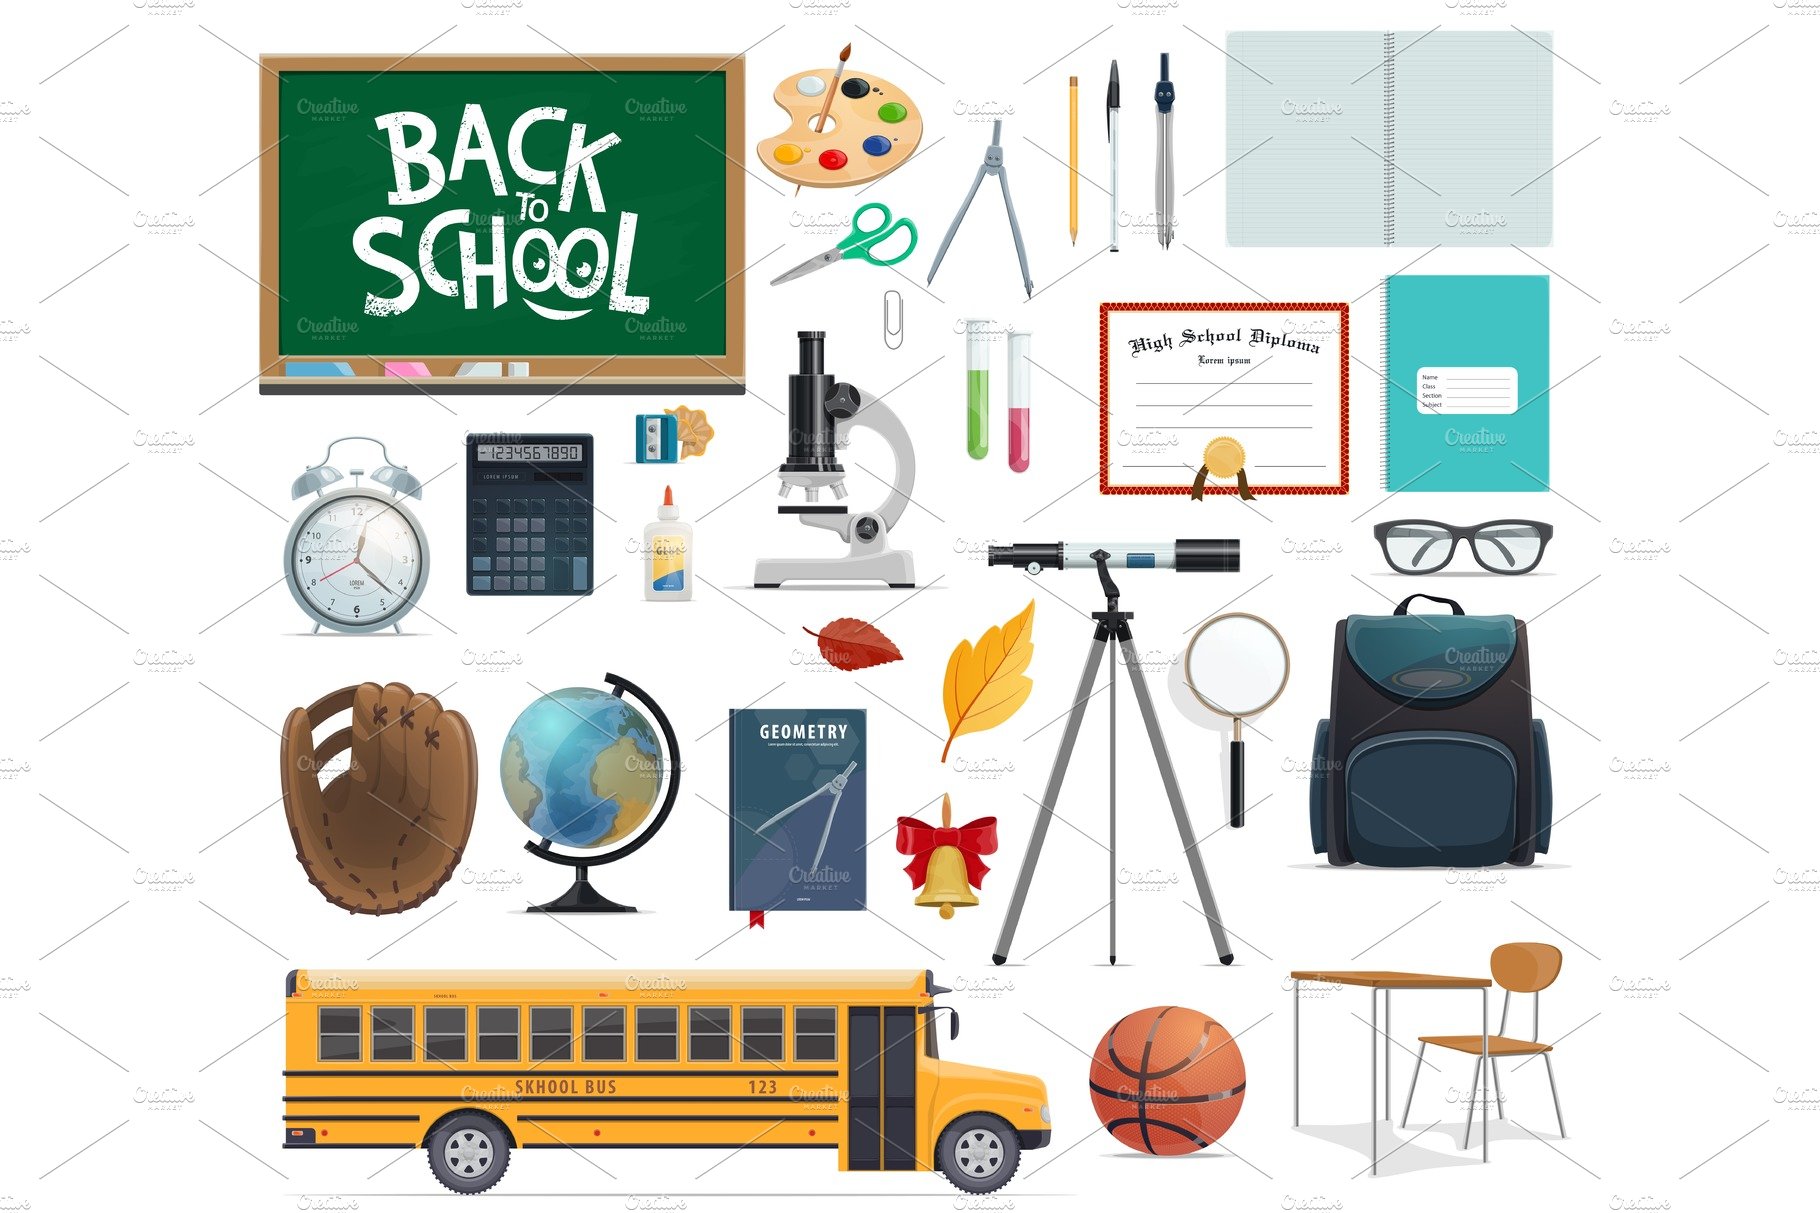 Back to school icon of education supplies and item cover image.